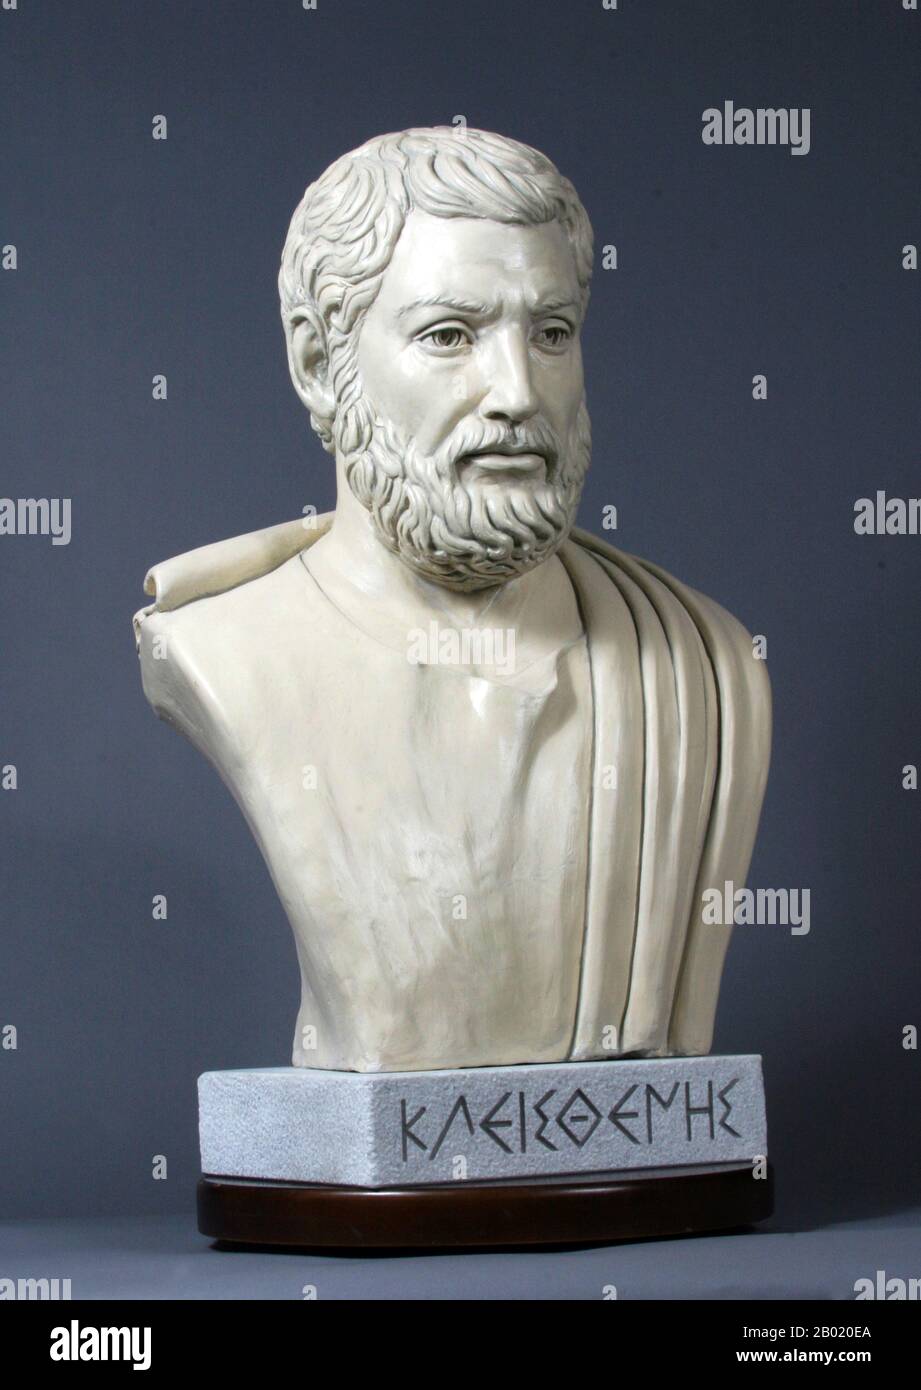 Cleisthenes (Greek: Κλεισθένης, also Clisthenes or Kleisthenes) was a noble Athenian of the Alcmaeonid family. He is credited with reforming the constitution of ancient Athens and setting it on a democratic footing in 508/7 BCE. For these accomplishments, historians refer to him as 'The Father of Athenian Democracy'.   He was the maternal grandson of the tyrant Cleisthenes of Sicyon, as the younger son of the latter's daughter Agariste and her husband Megacles. Also, he was credited for increasing powers of assembly and he also broke up the power of the nobility of Athens. Stock Photo